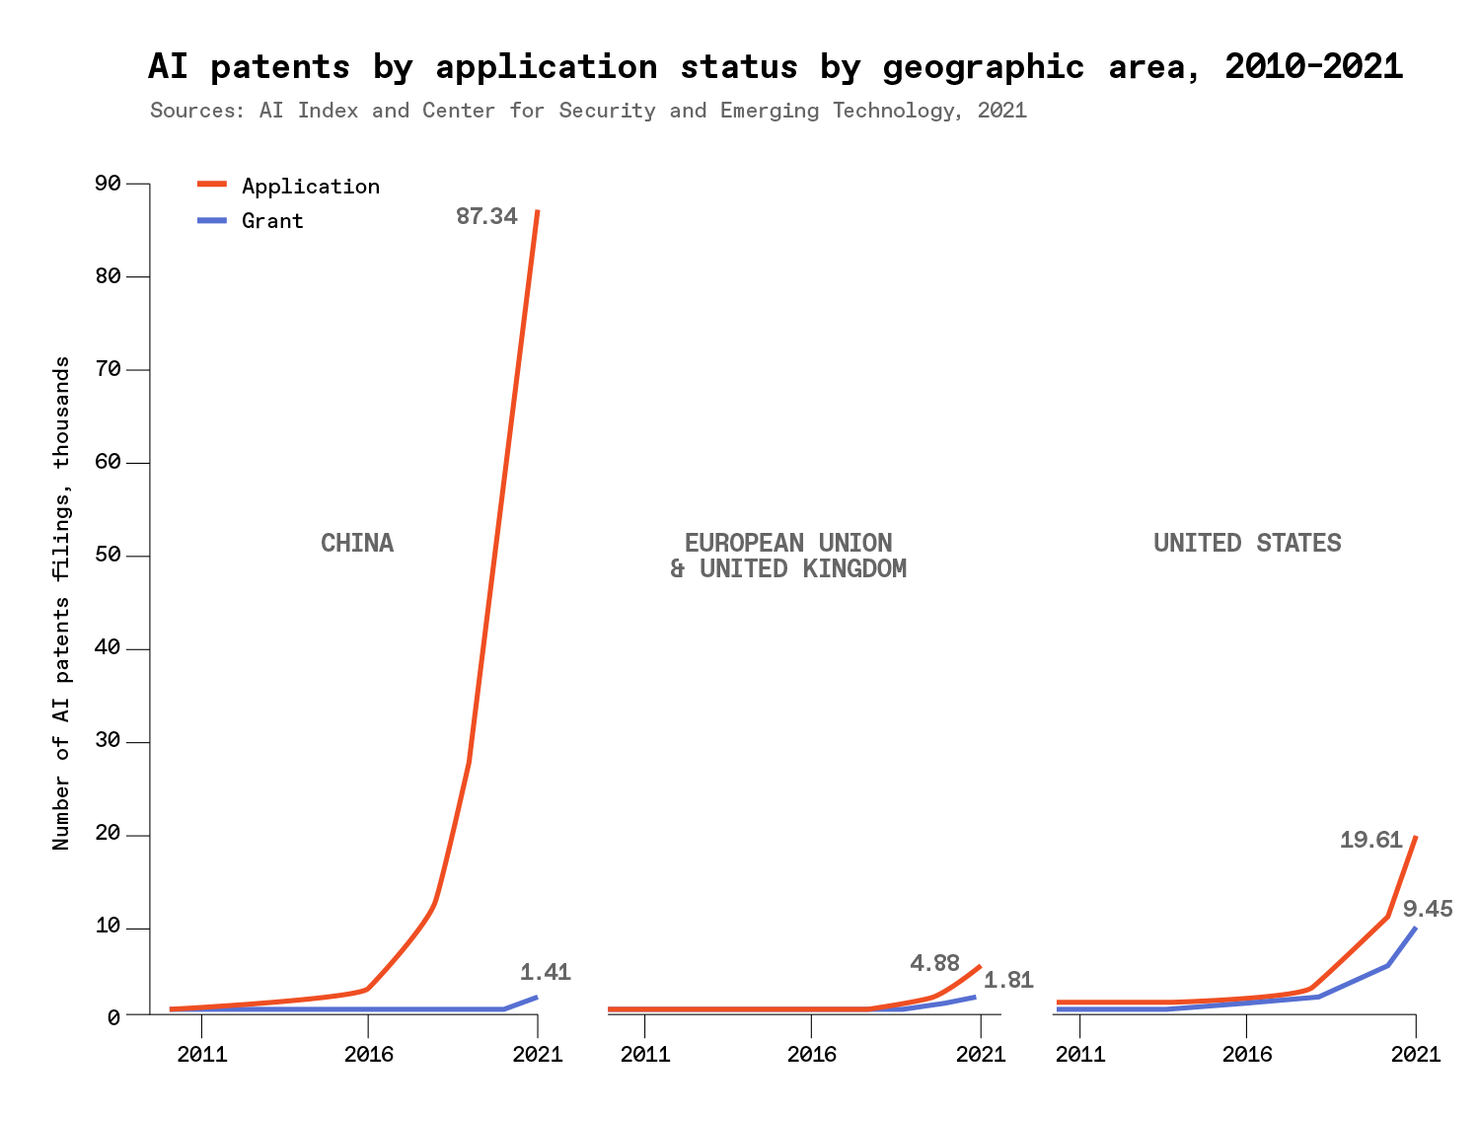 Charts showing AI patents by application status by geographic area, 2010-2021